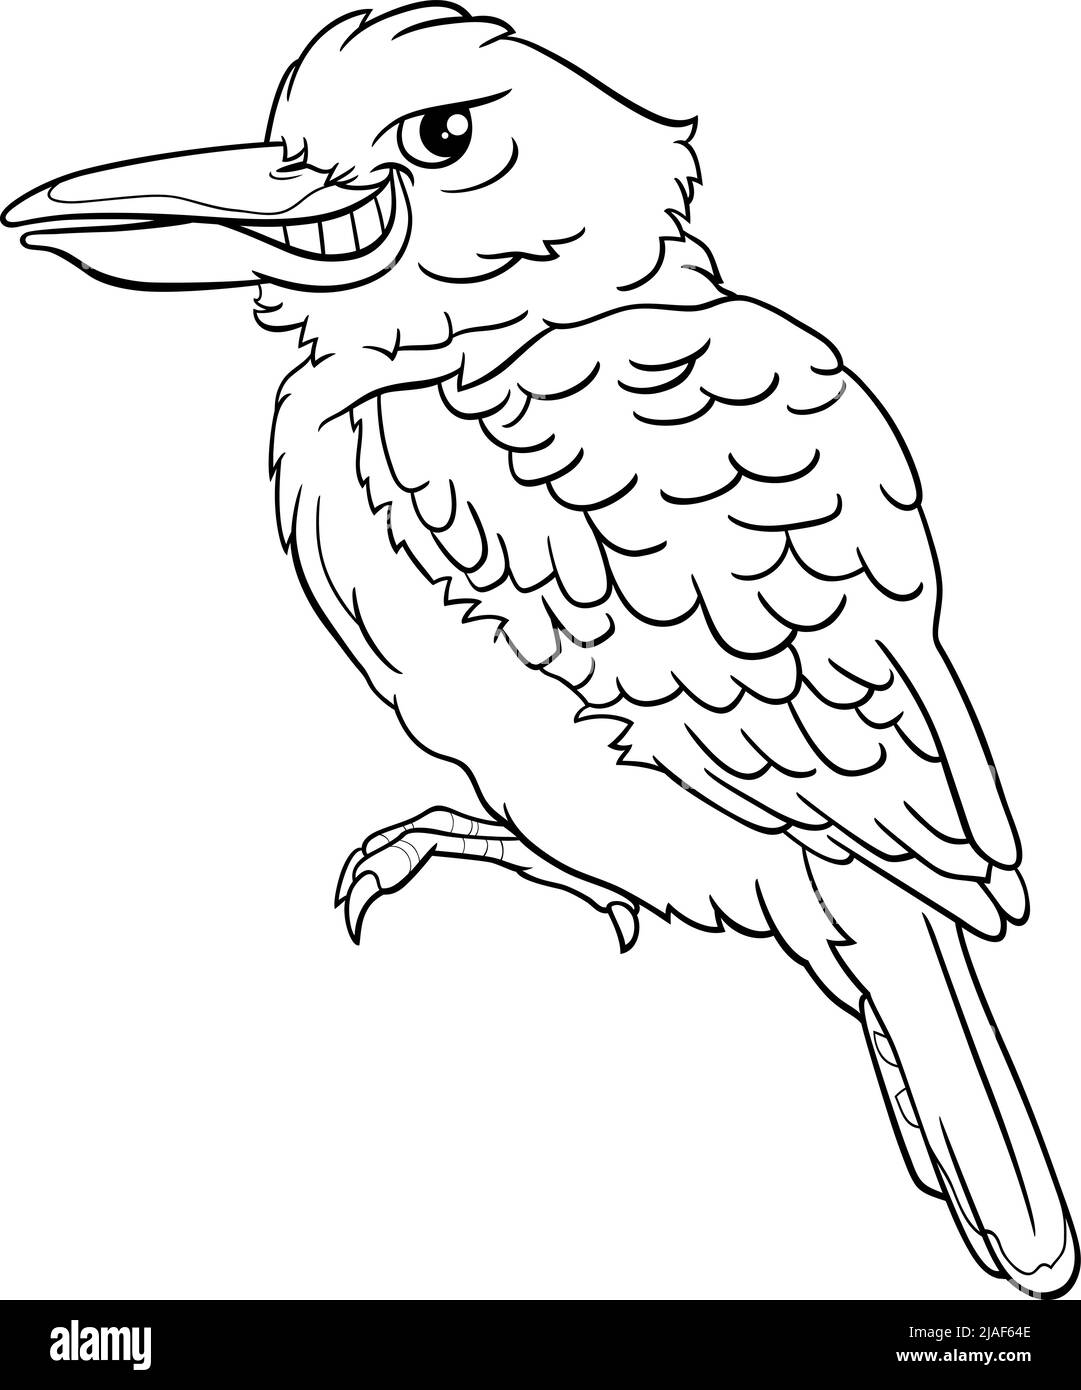 Black and white cartoon illustration of funny kookaburra bird animal character coloring page Stock Vector